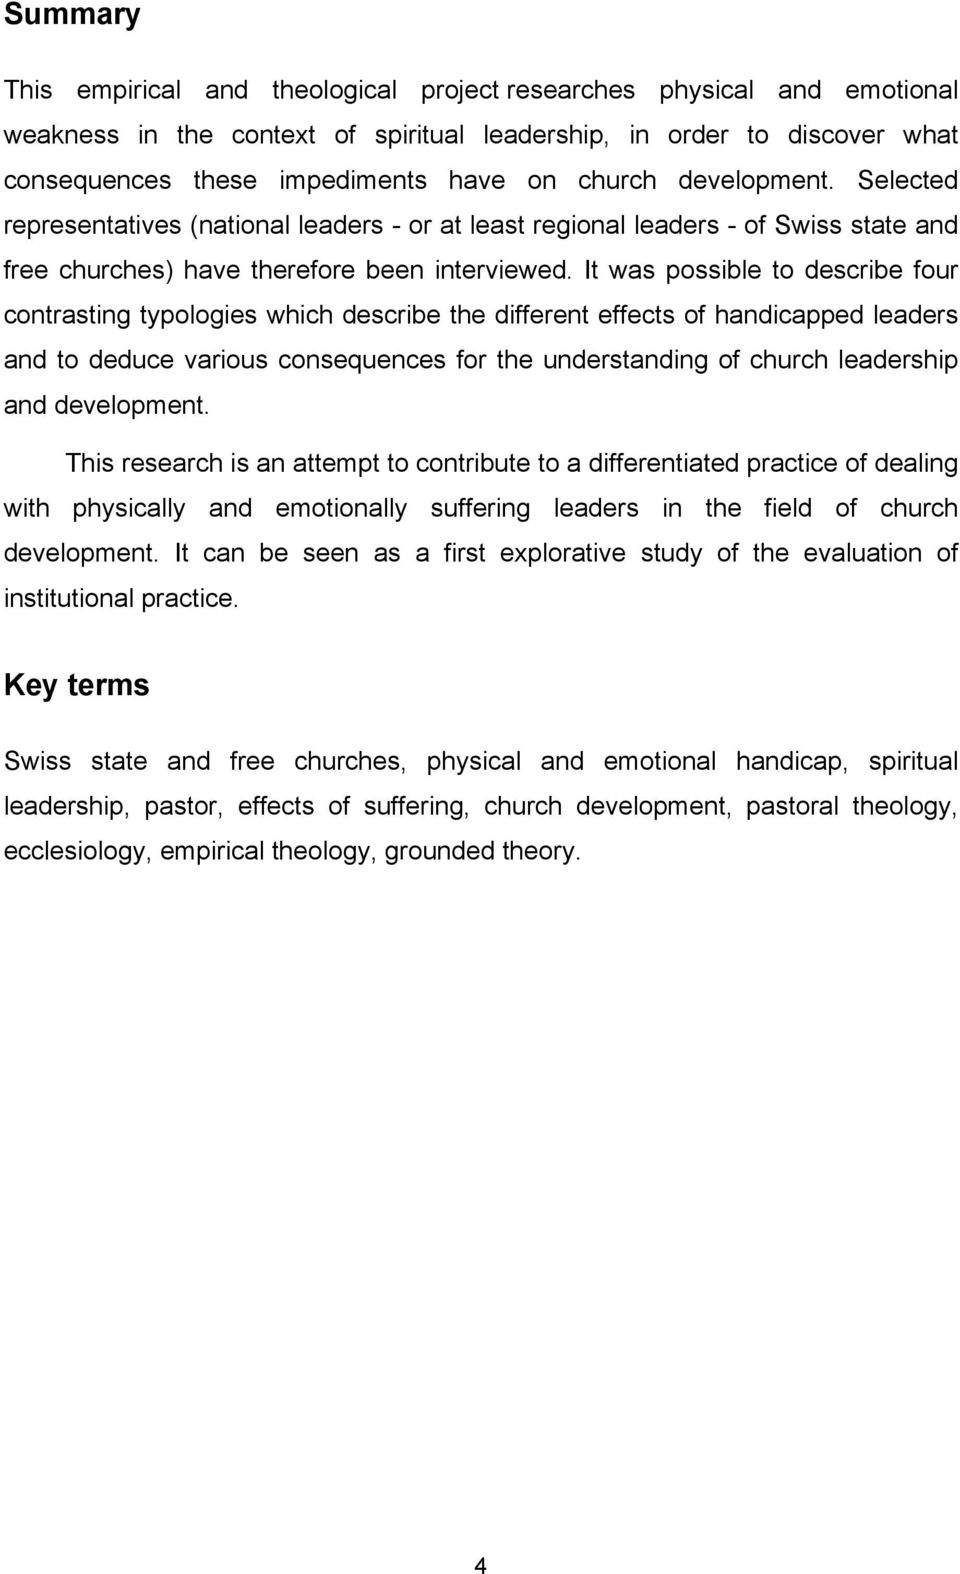 It was possible to describe four contrasting typologies which describe the different effects of handicapped leaders and to deduce various consequences for the understanding of church leadership and